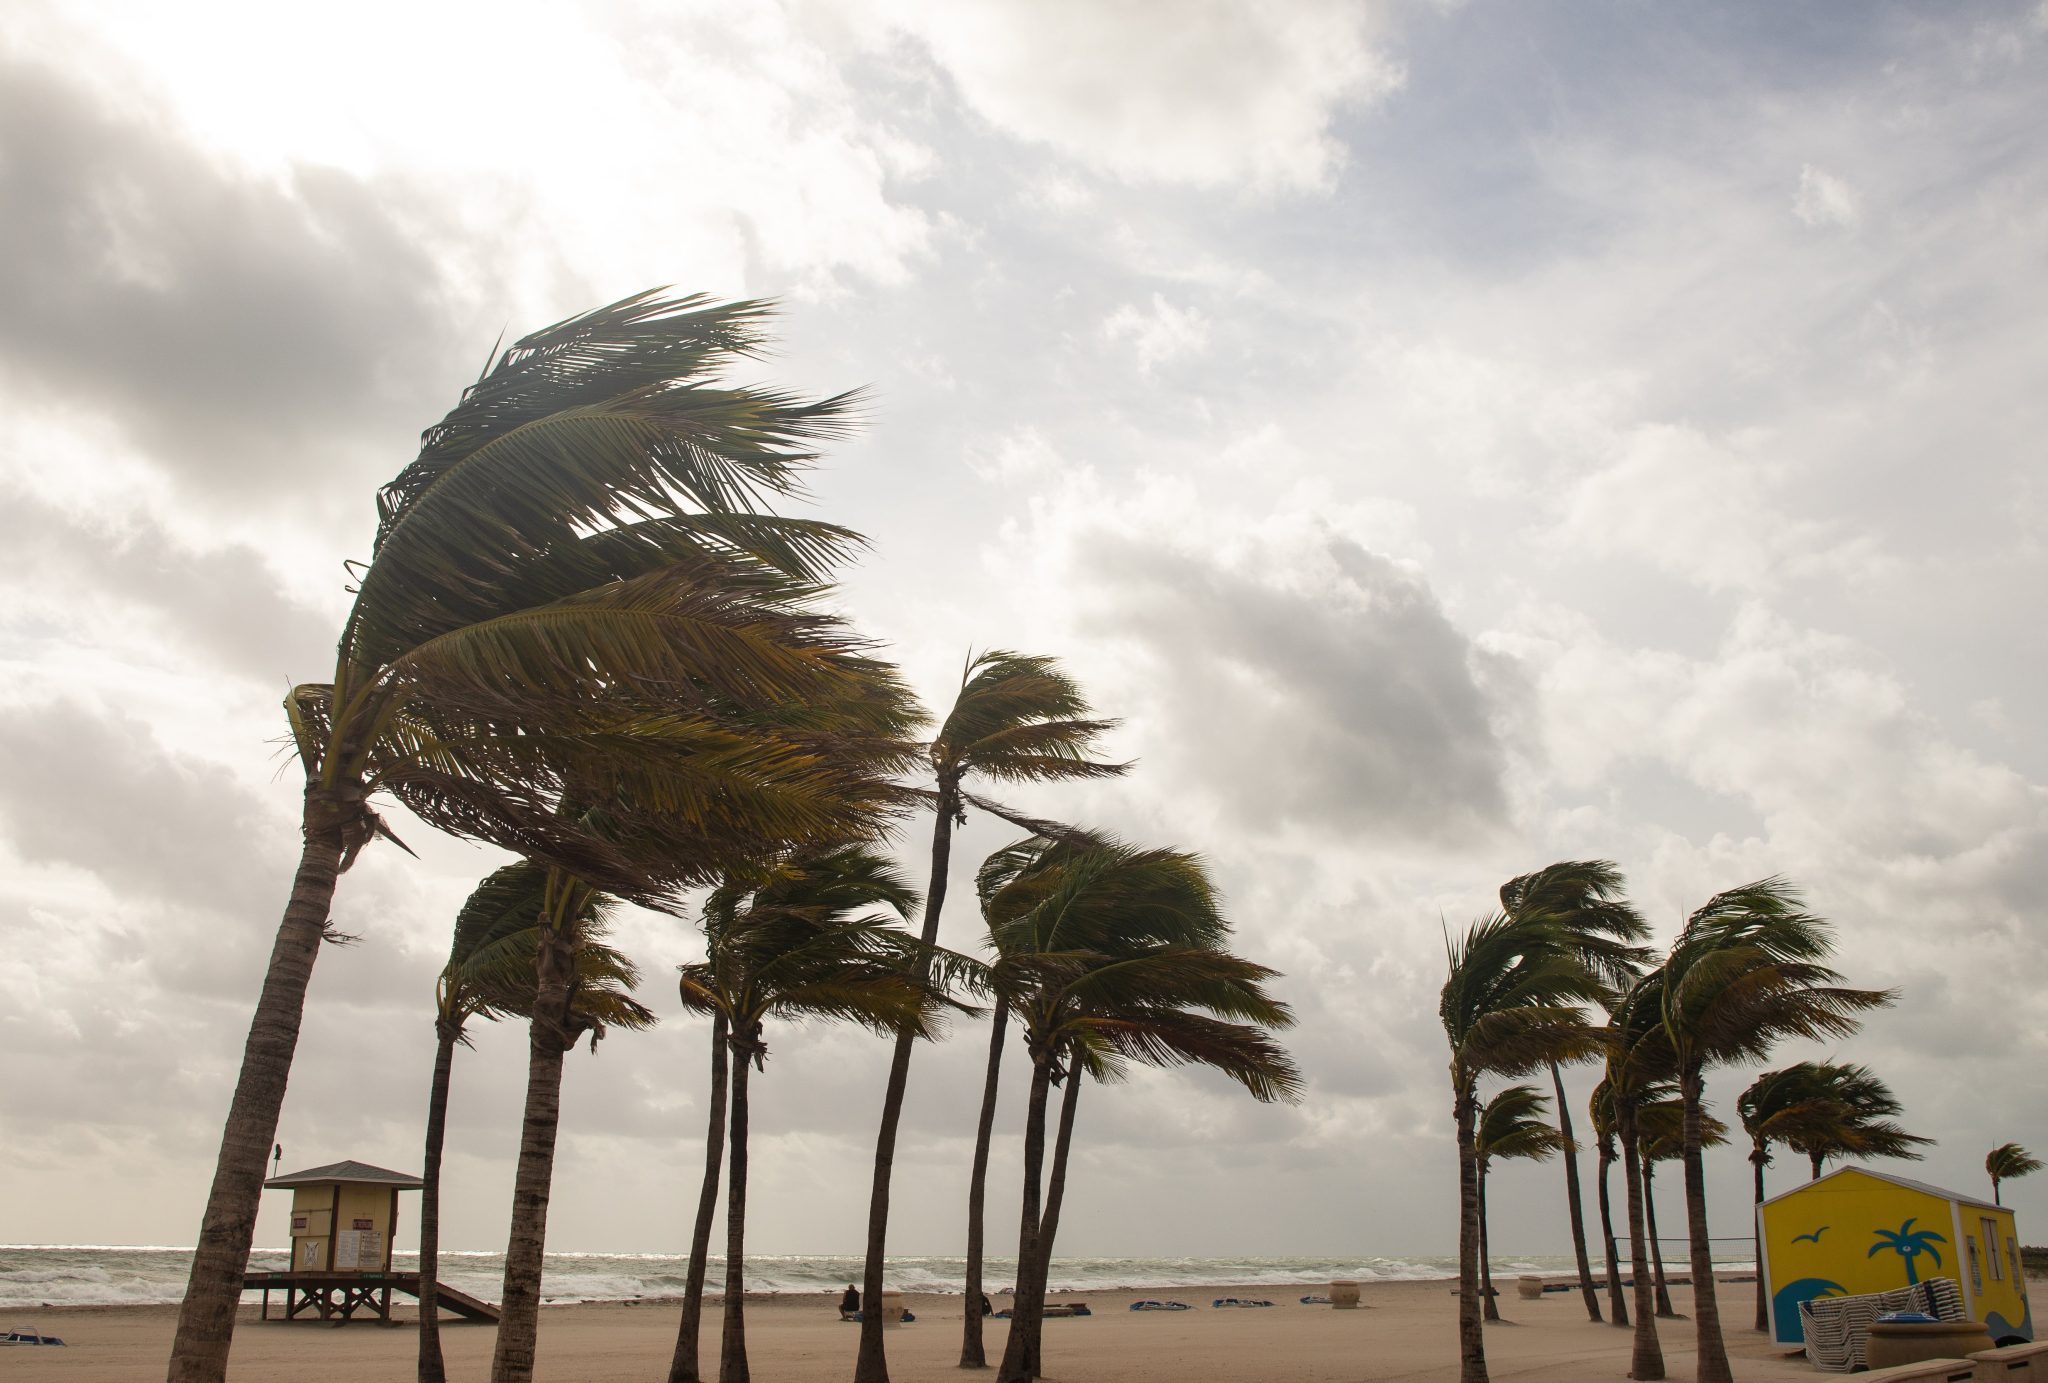 which way do hurricane winds blow?